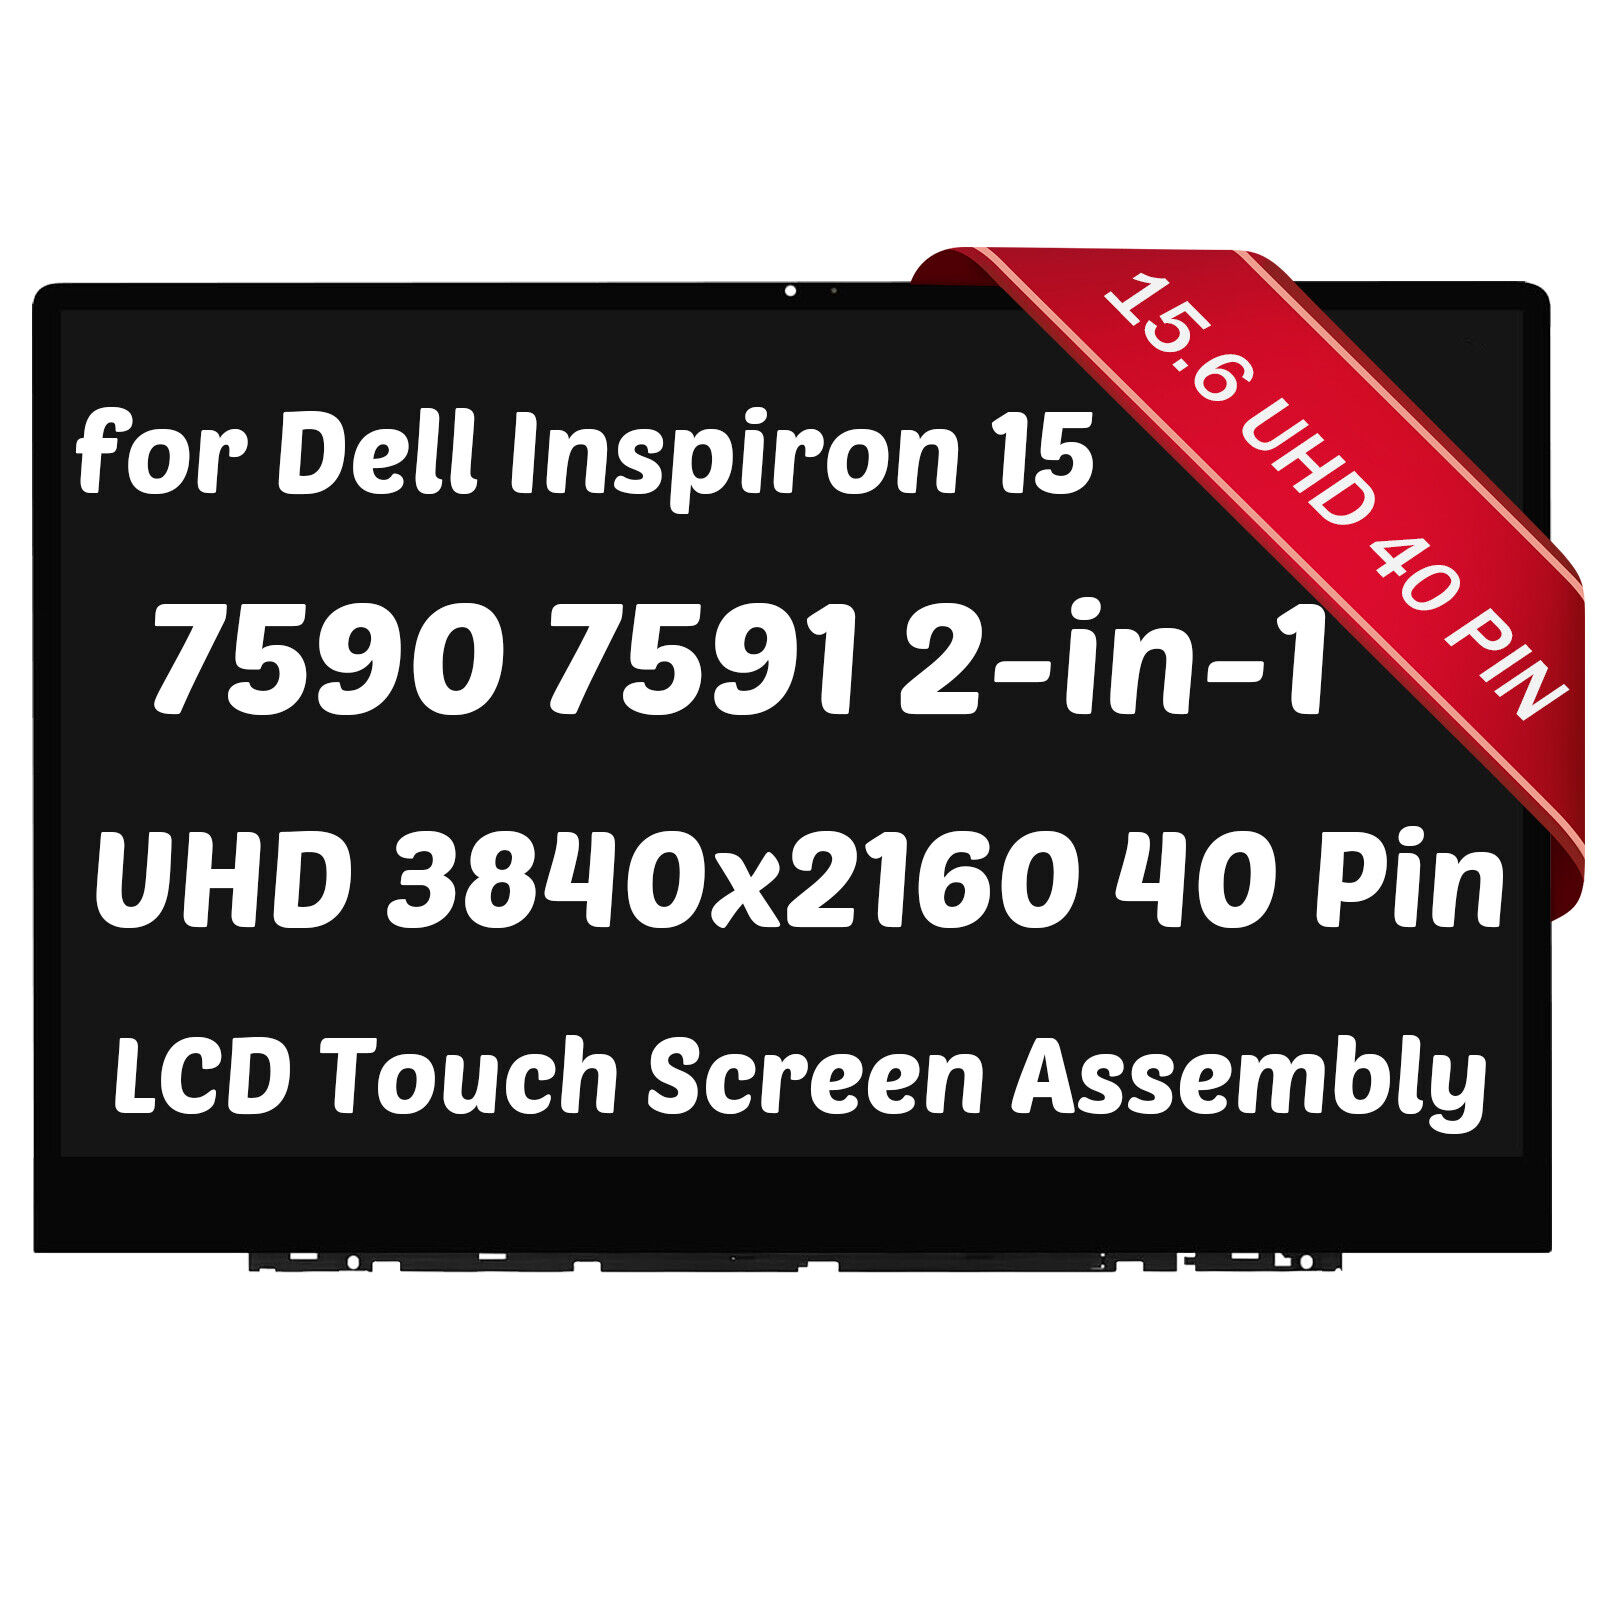 LCD Touch Screen Assembly UHD 3840x2160 for Dell Inspiron 15 7590 7591 2-in-1